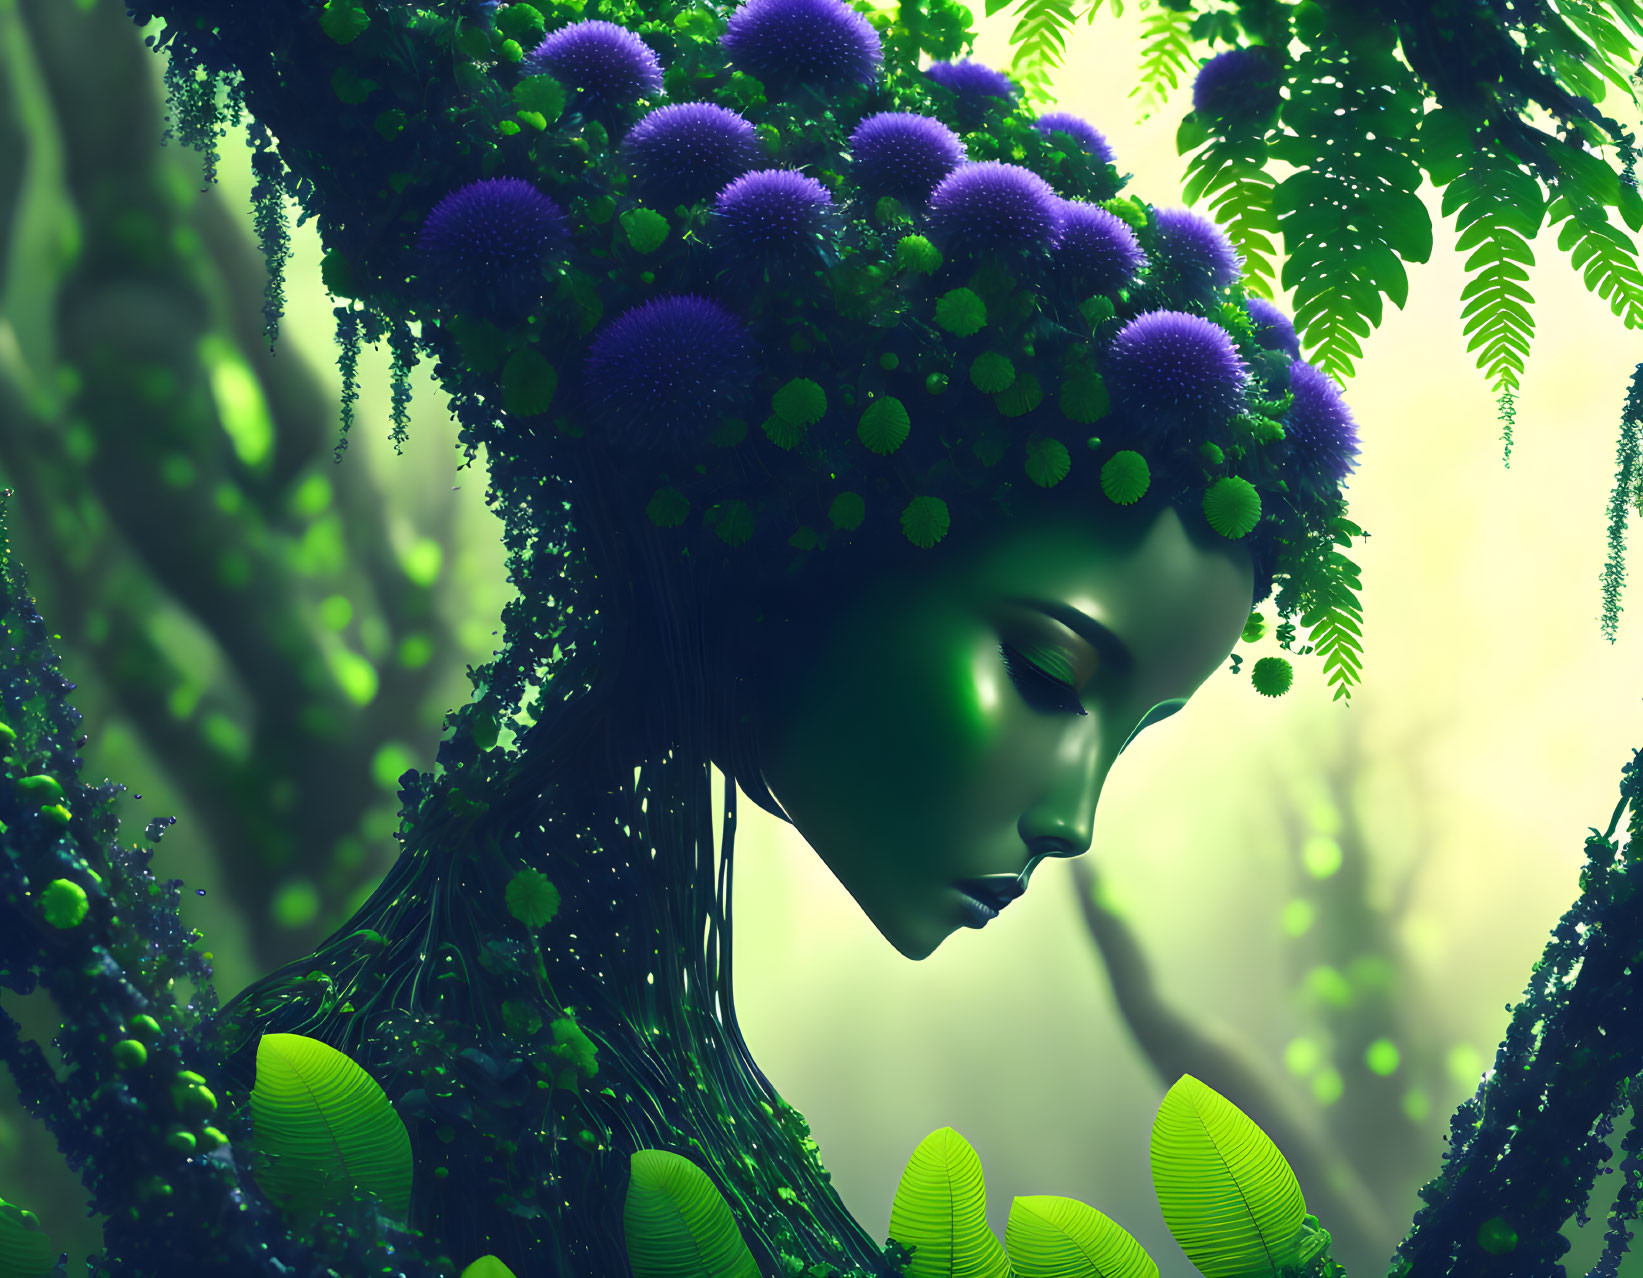 Green humanoid figure with tree-like features in misty forest landscape